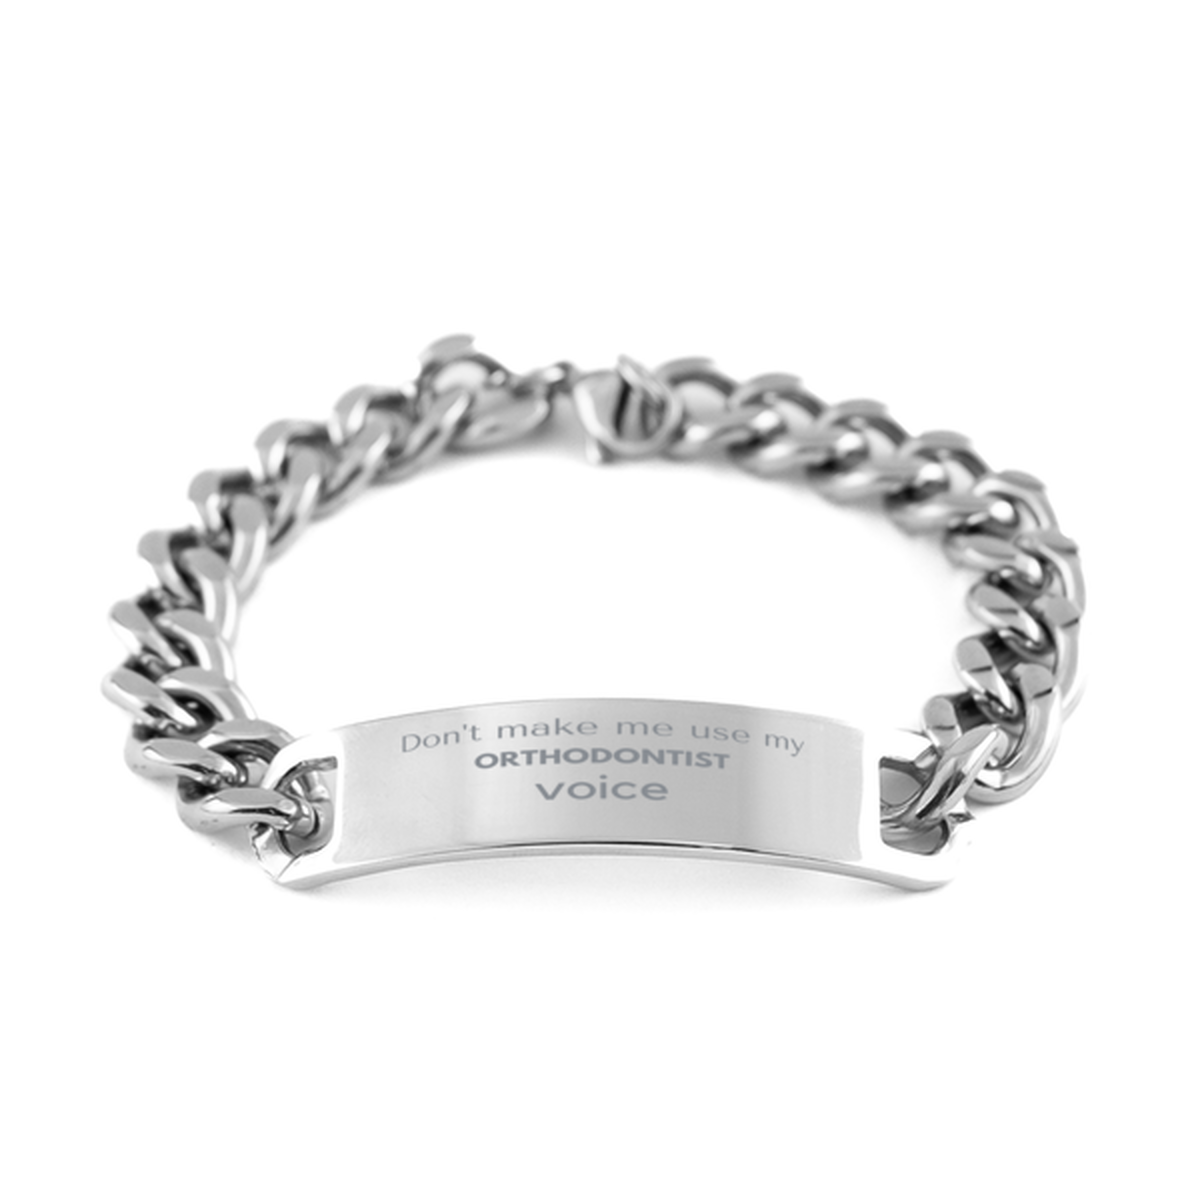 Don't make me use my Orthodontist voice, Sarcasm Orthodontist Gifts, Christmas Orthodontist Cuban Chain Stainless Steel Bracelet Birthday Unique Gifts For Orthodontist Coworkers, Men, Women, Colleague, Friends